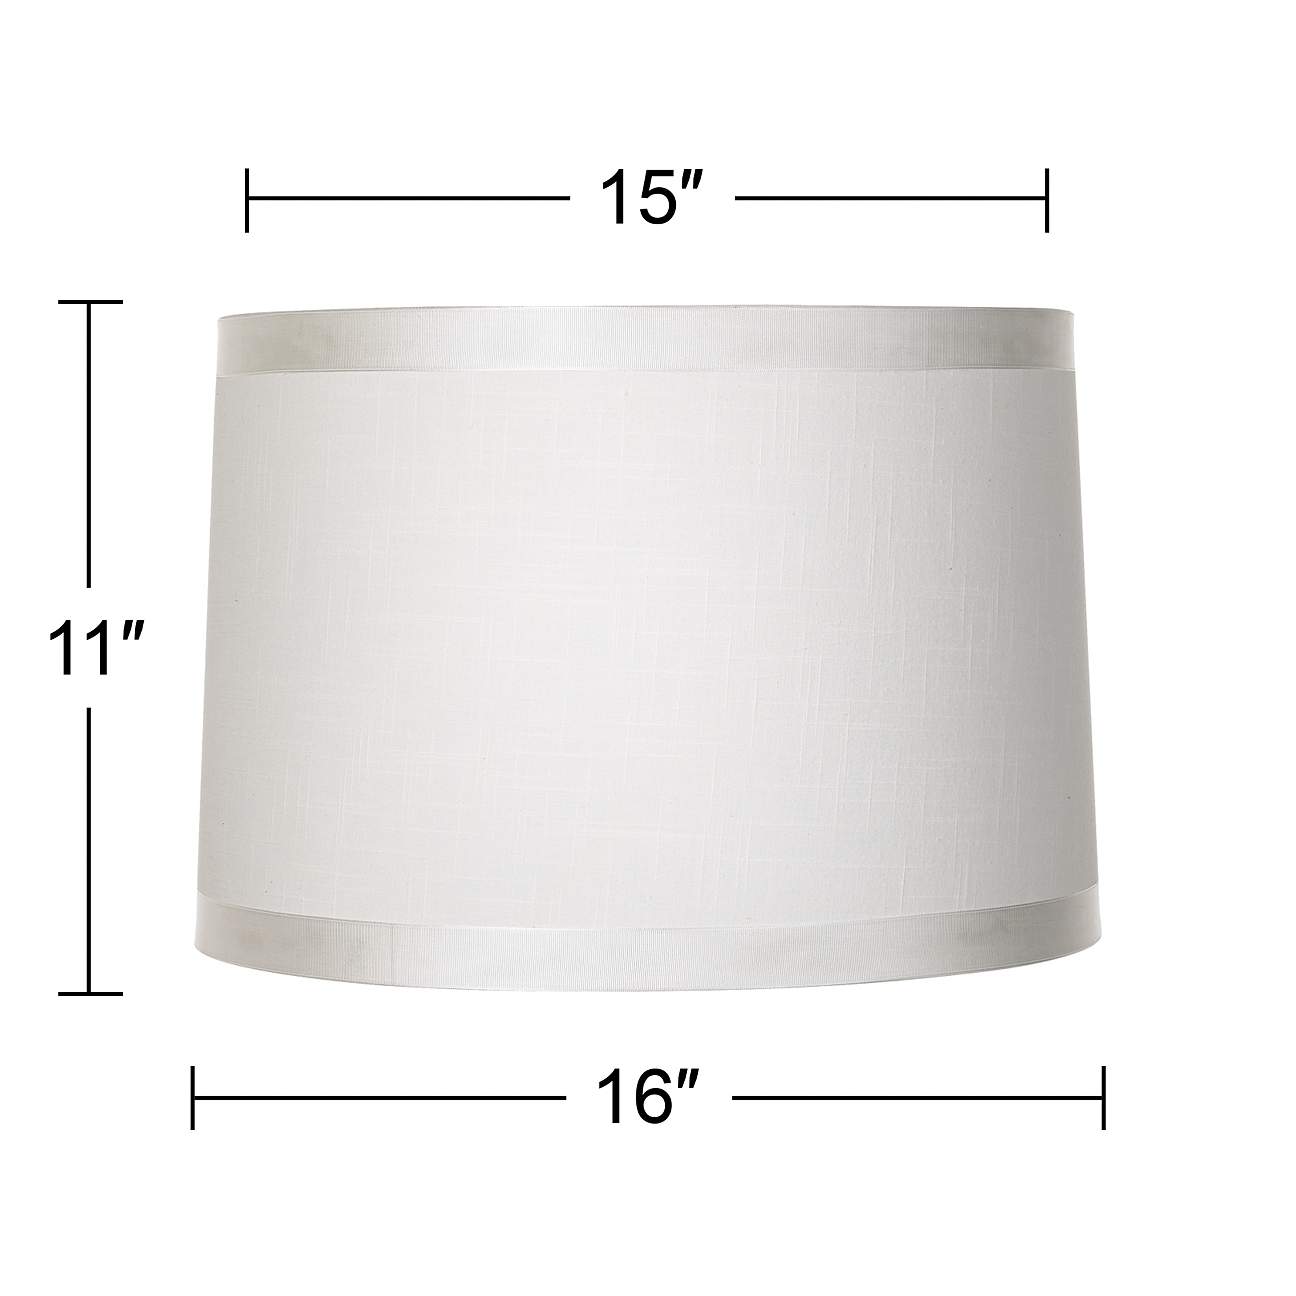 Off White Fabric Drum Shade 15x16x11 (Spider) - #39F48 | Lamps Plus